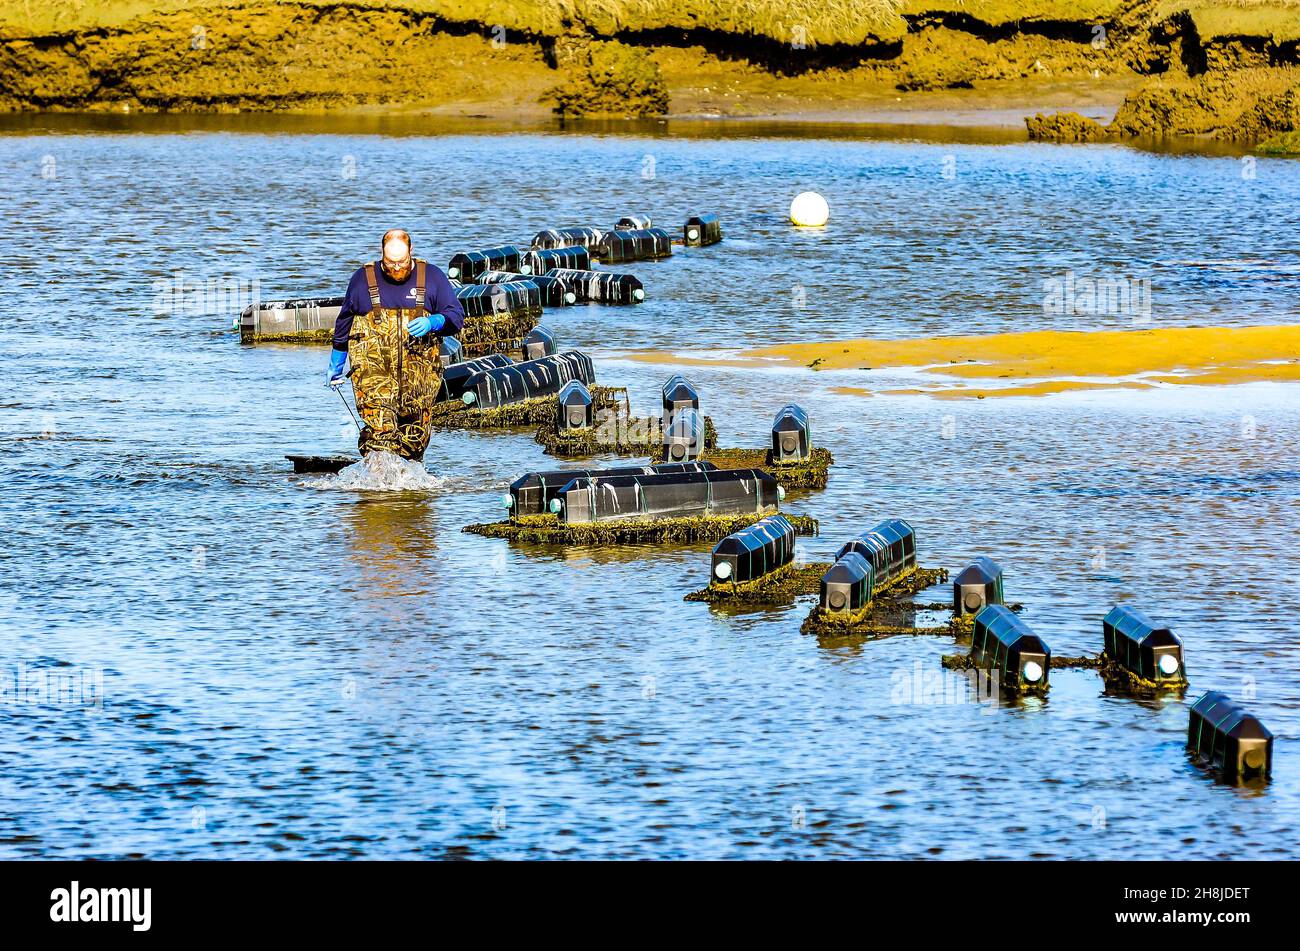 This Oyster farmer from the Massachusetts Department of Natural Resources,brings a box of oyster seedlings to be spread in this tidal salt water river. Stock Photo